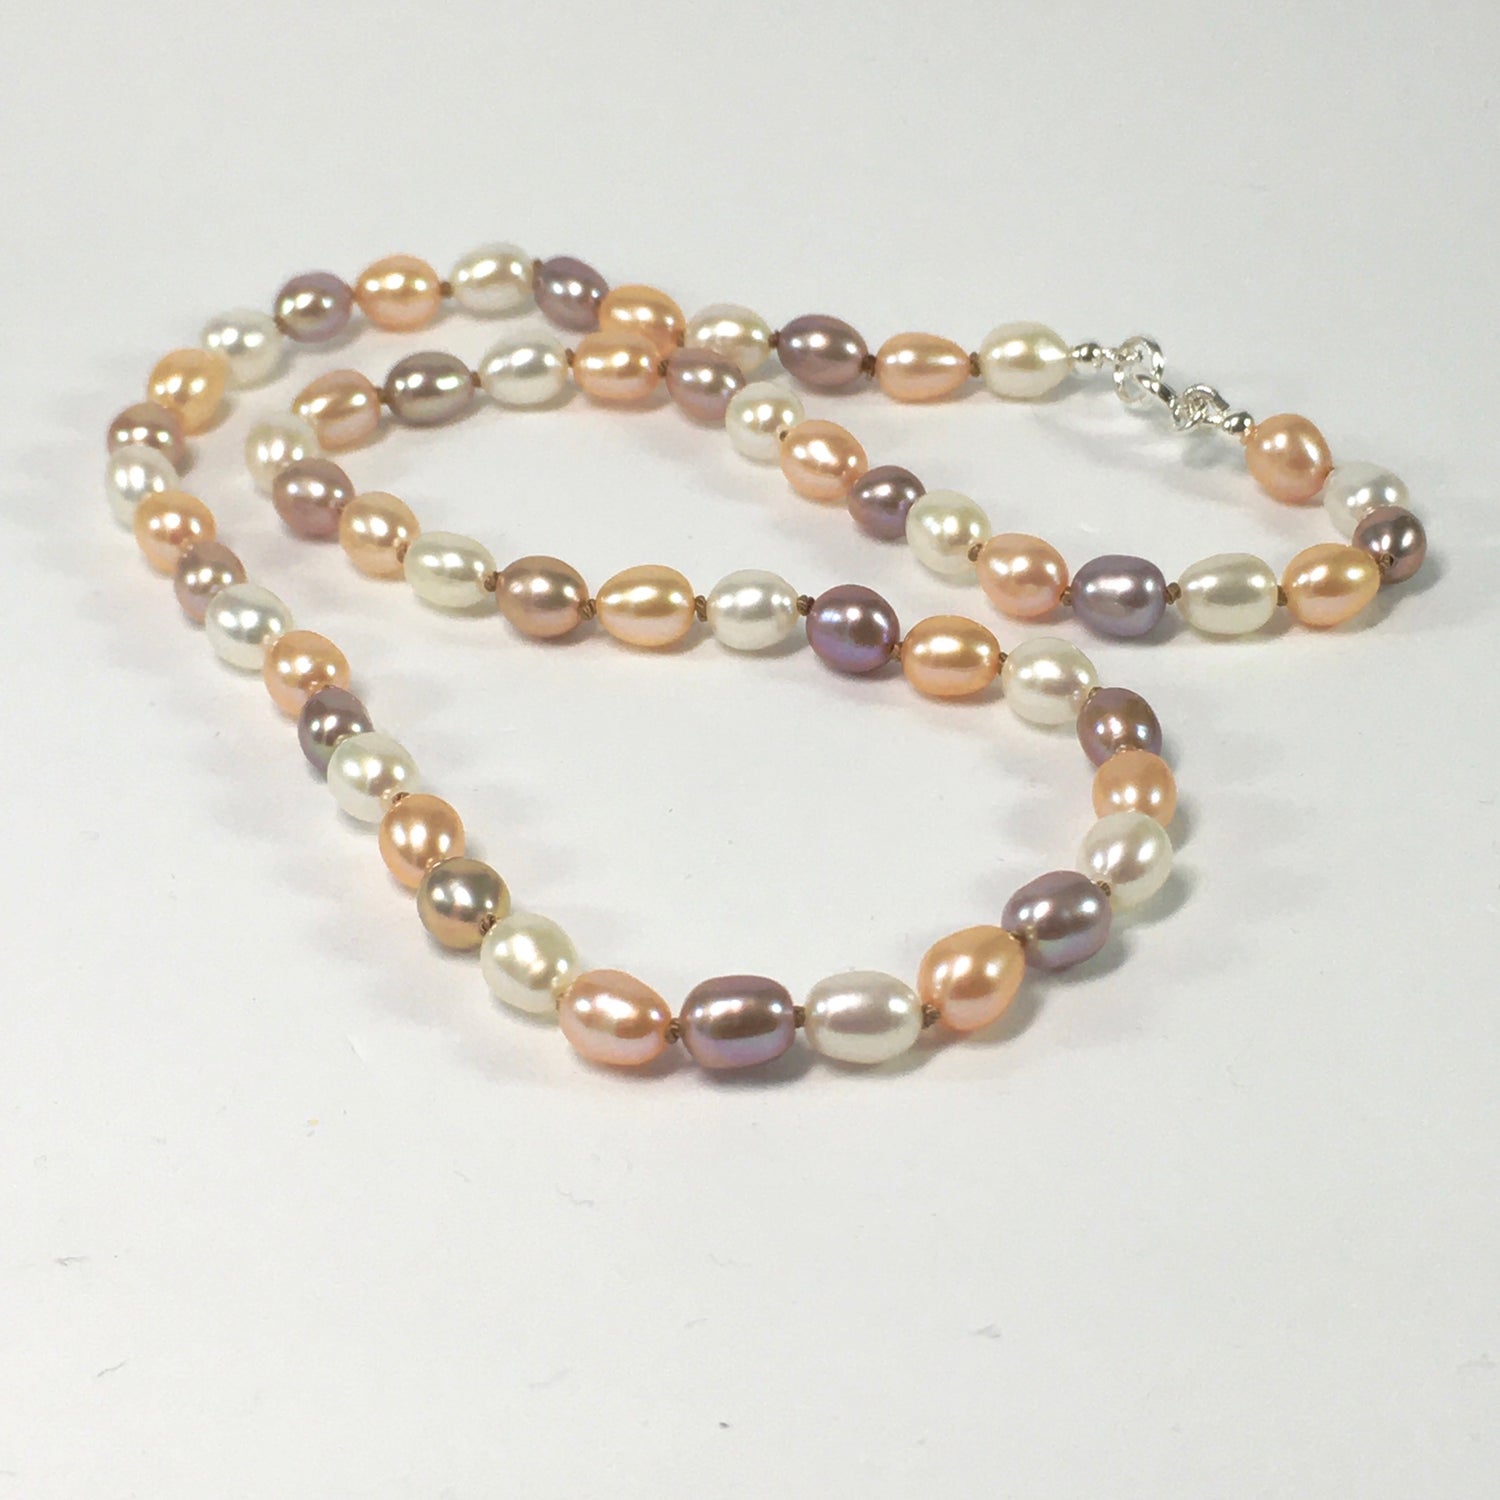 Handmade Knotted Pearl Necklace | Bridal Collection | Jewelz Galore 